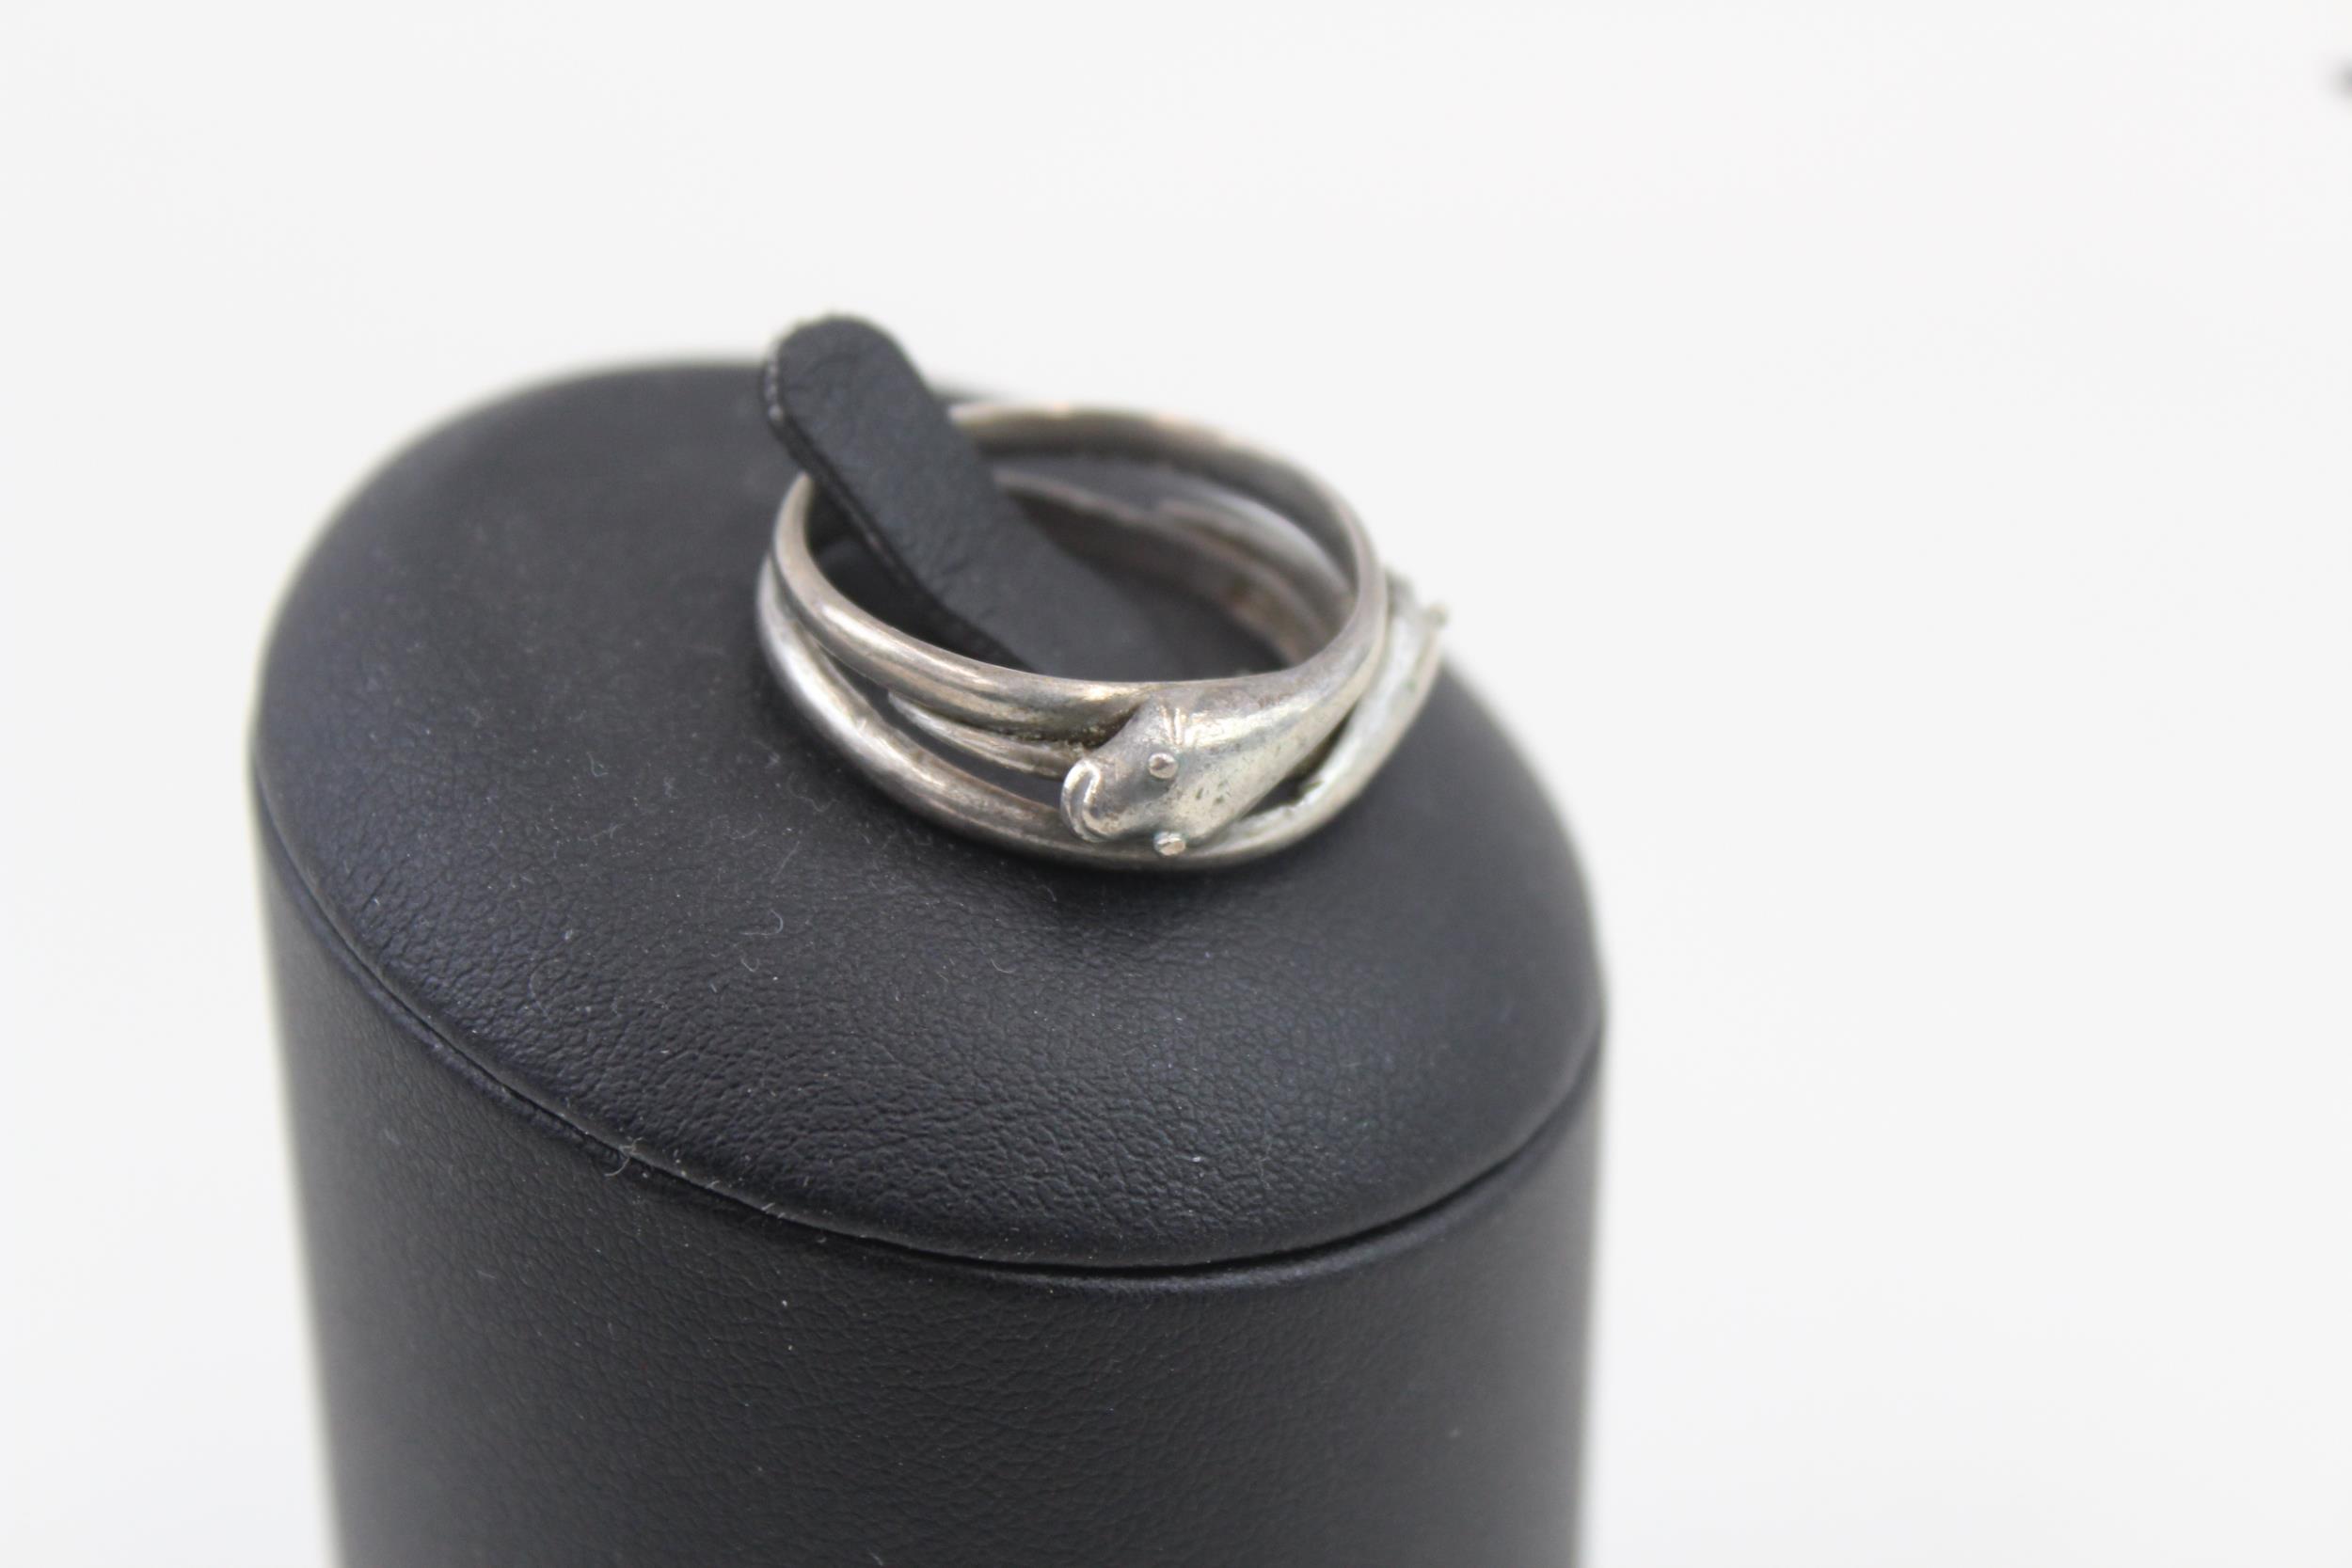 Silver Victorian double snake ring (4g) - Image 2 of 5